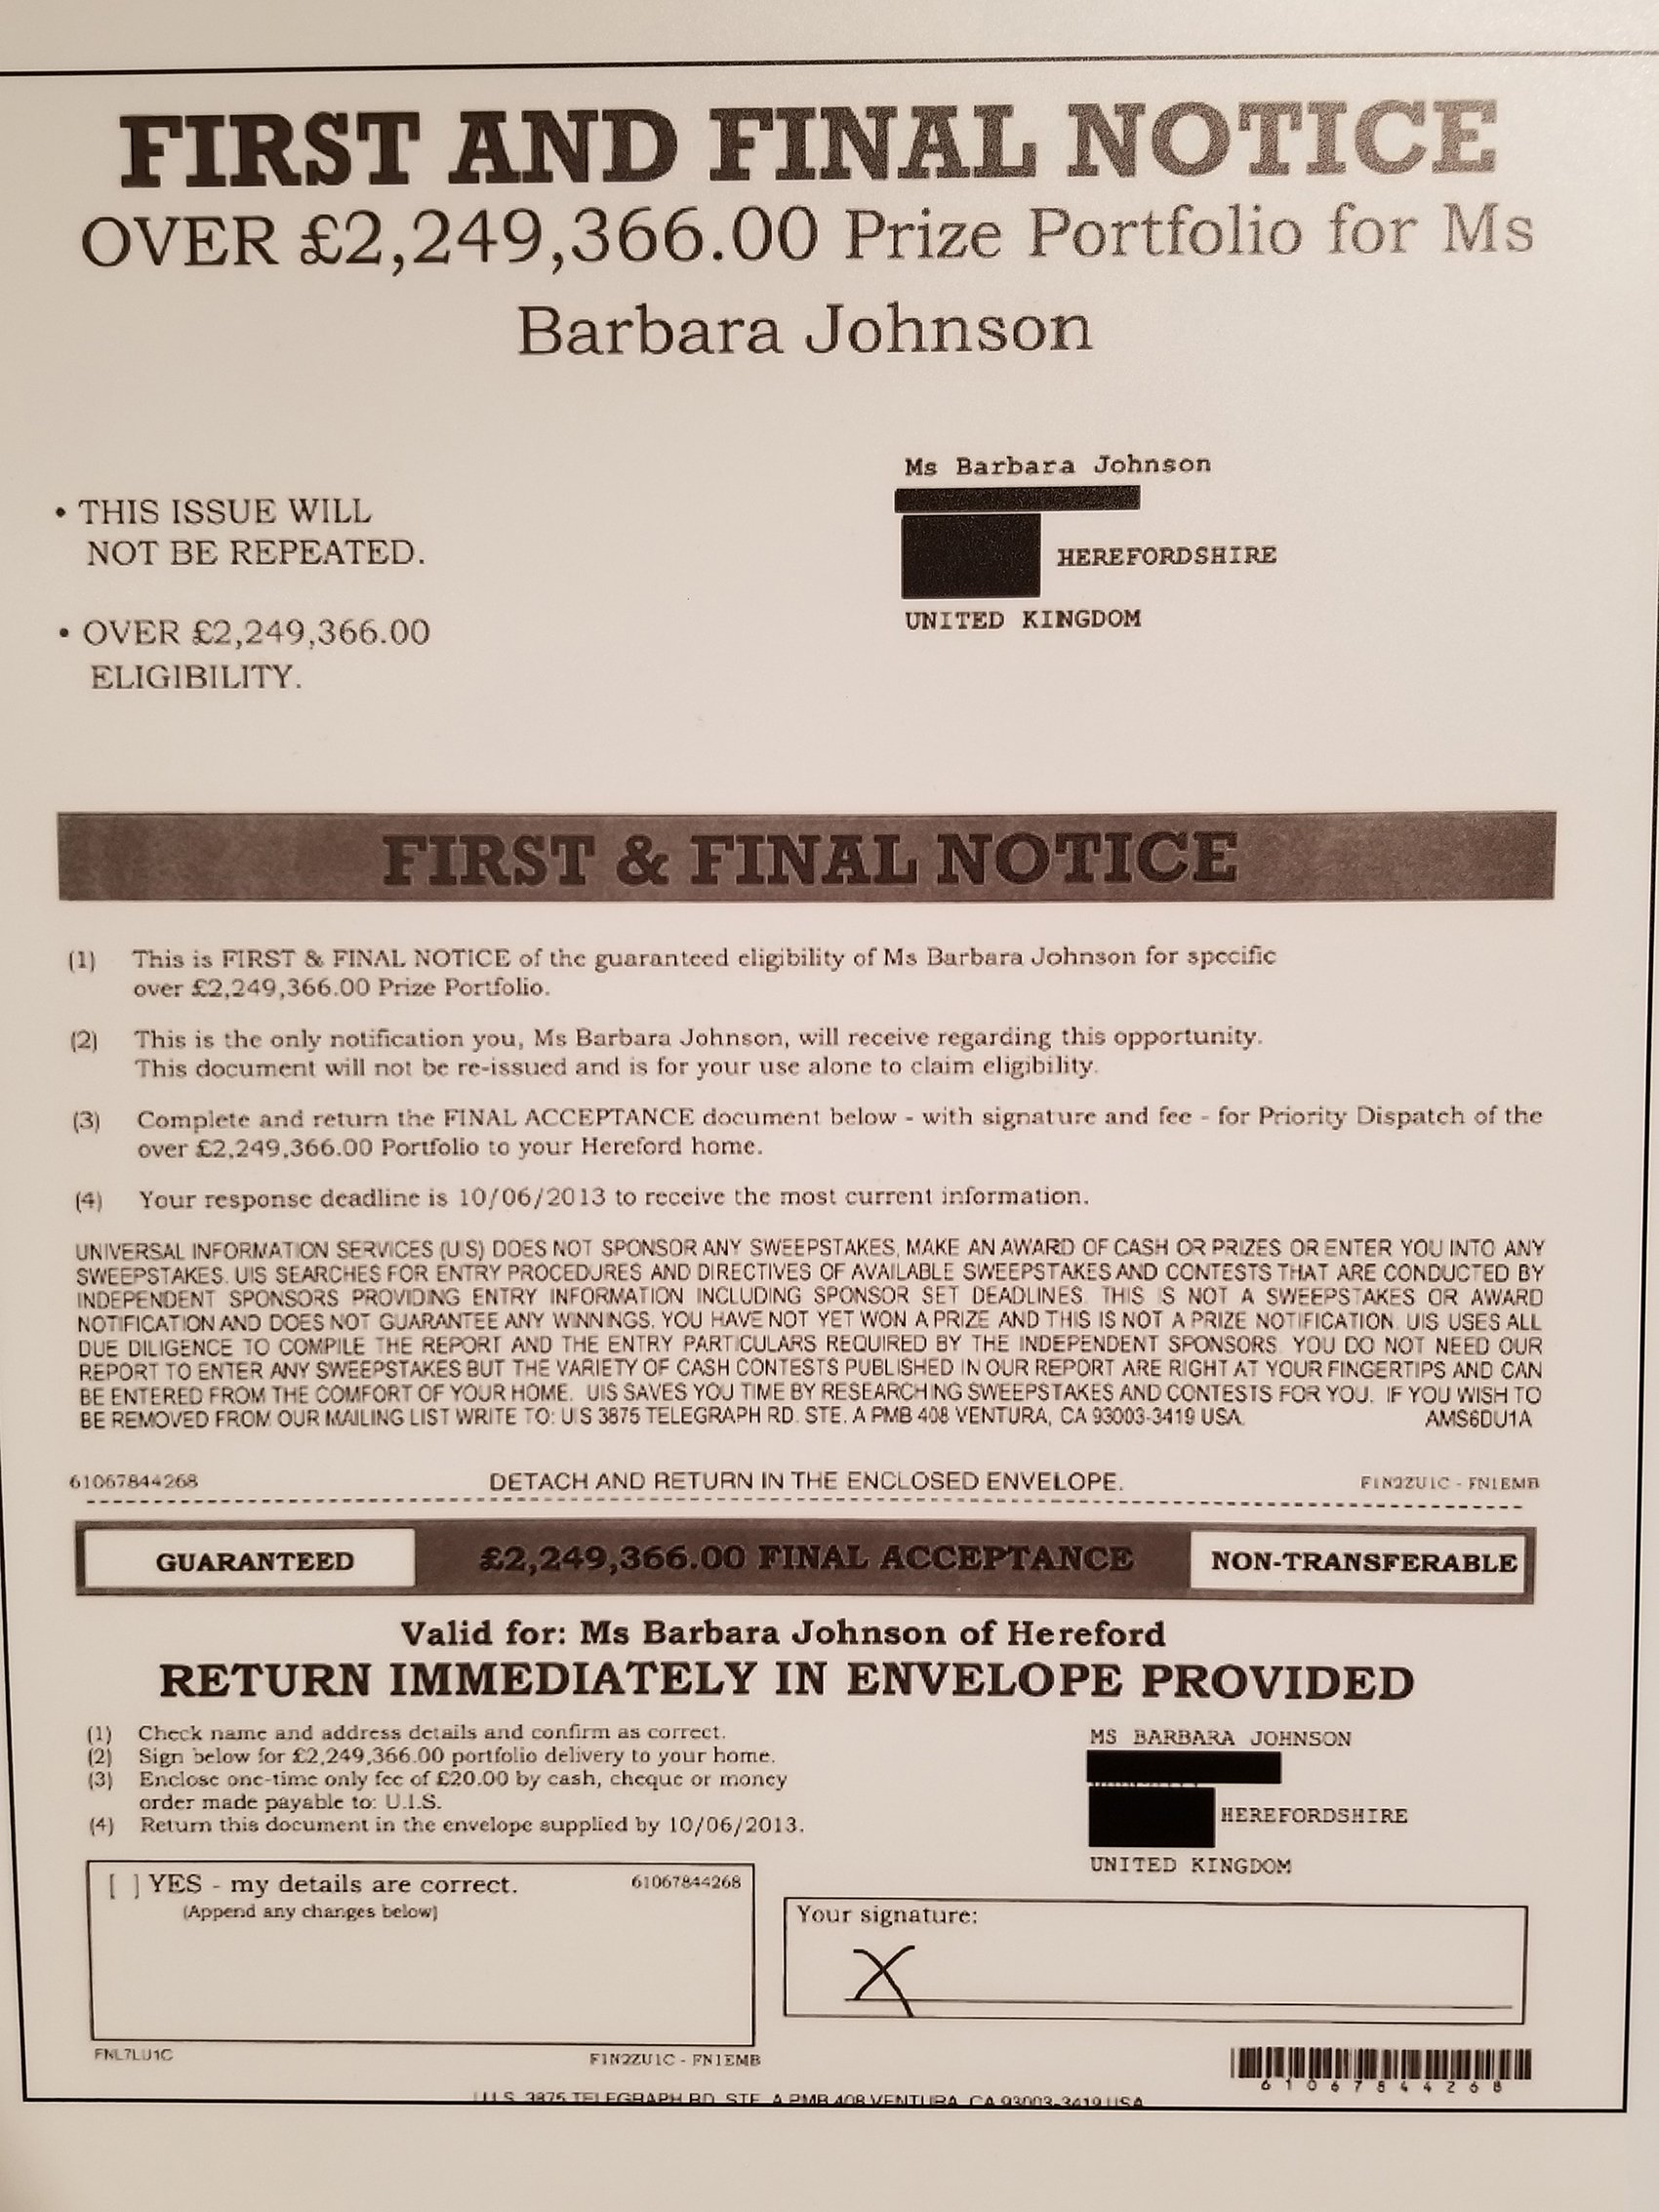 A copy of a scam notice sent to a woman informing her she had "won" more than two million British pounds. (Matt Masterson / Chicago Tonight)